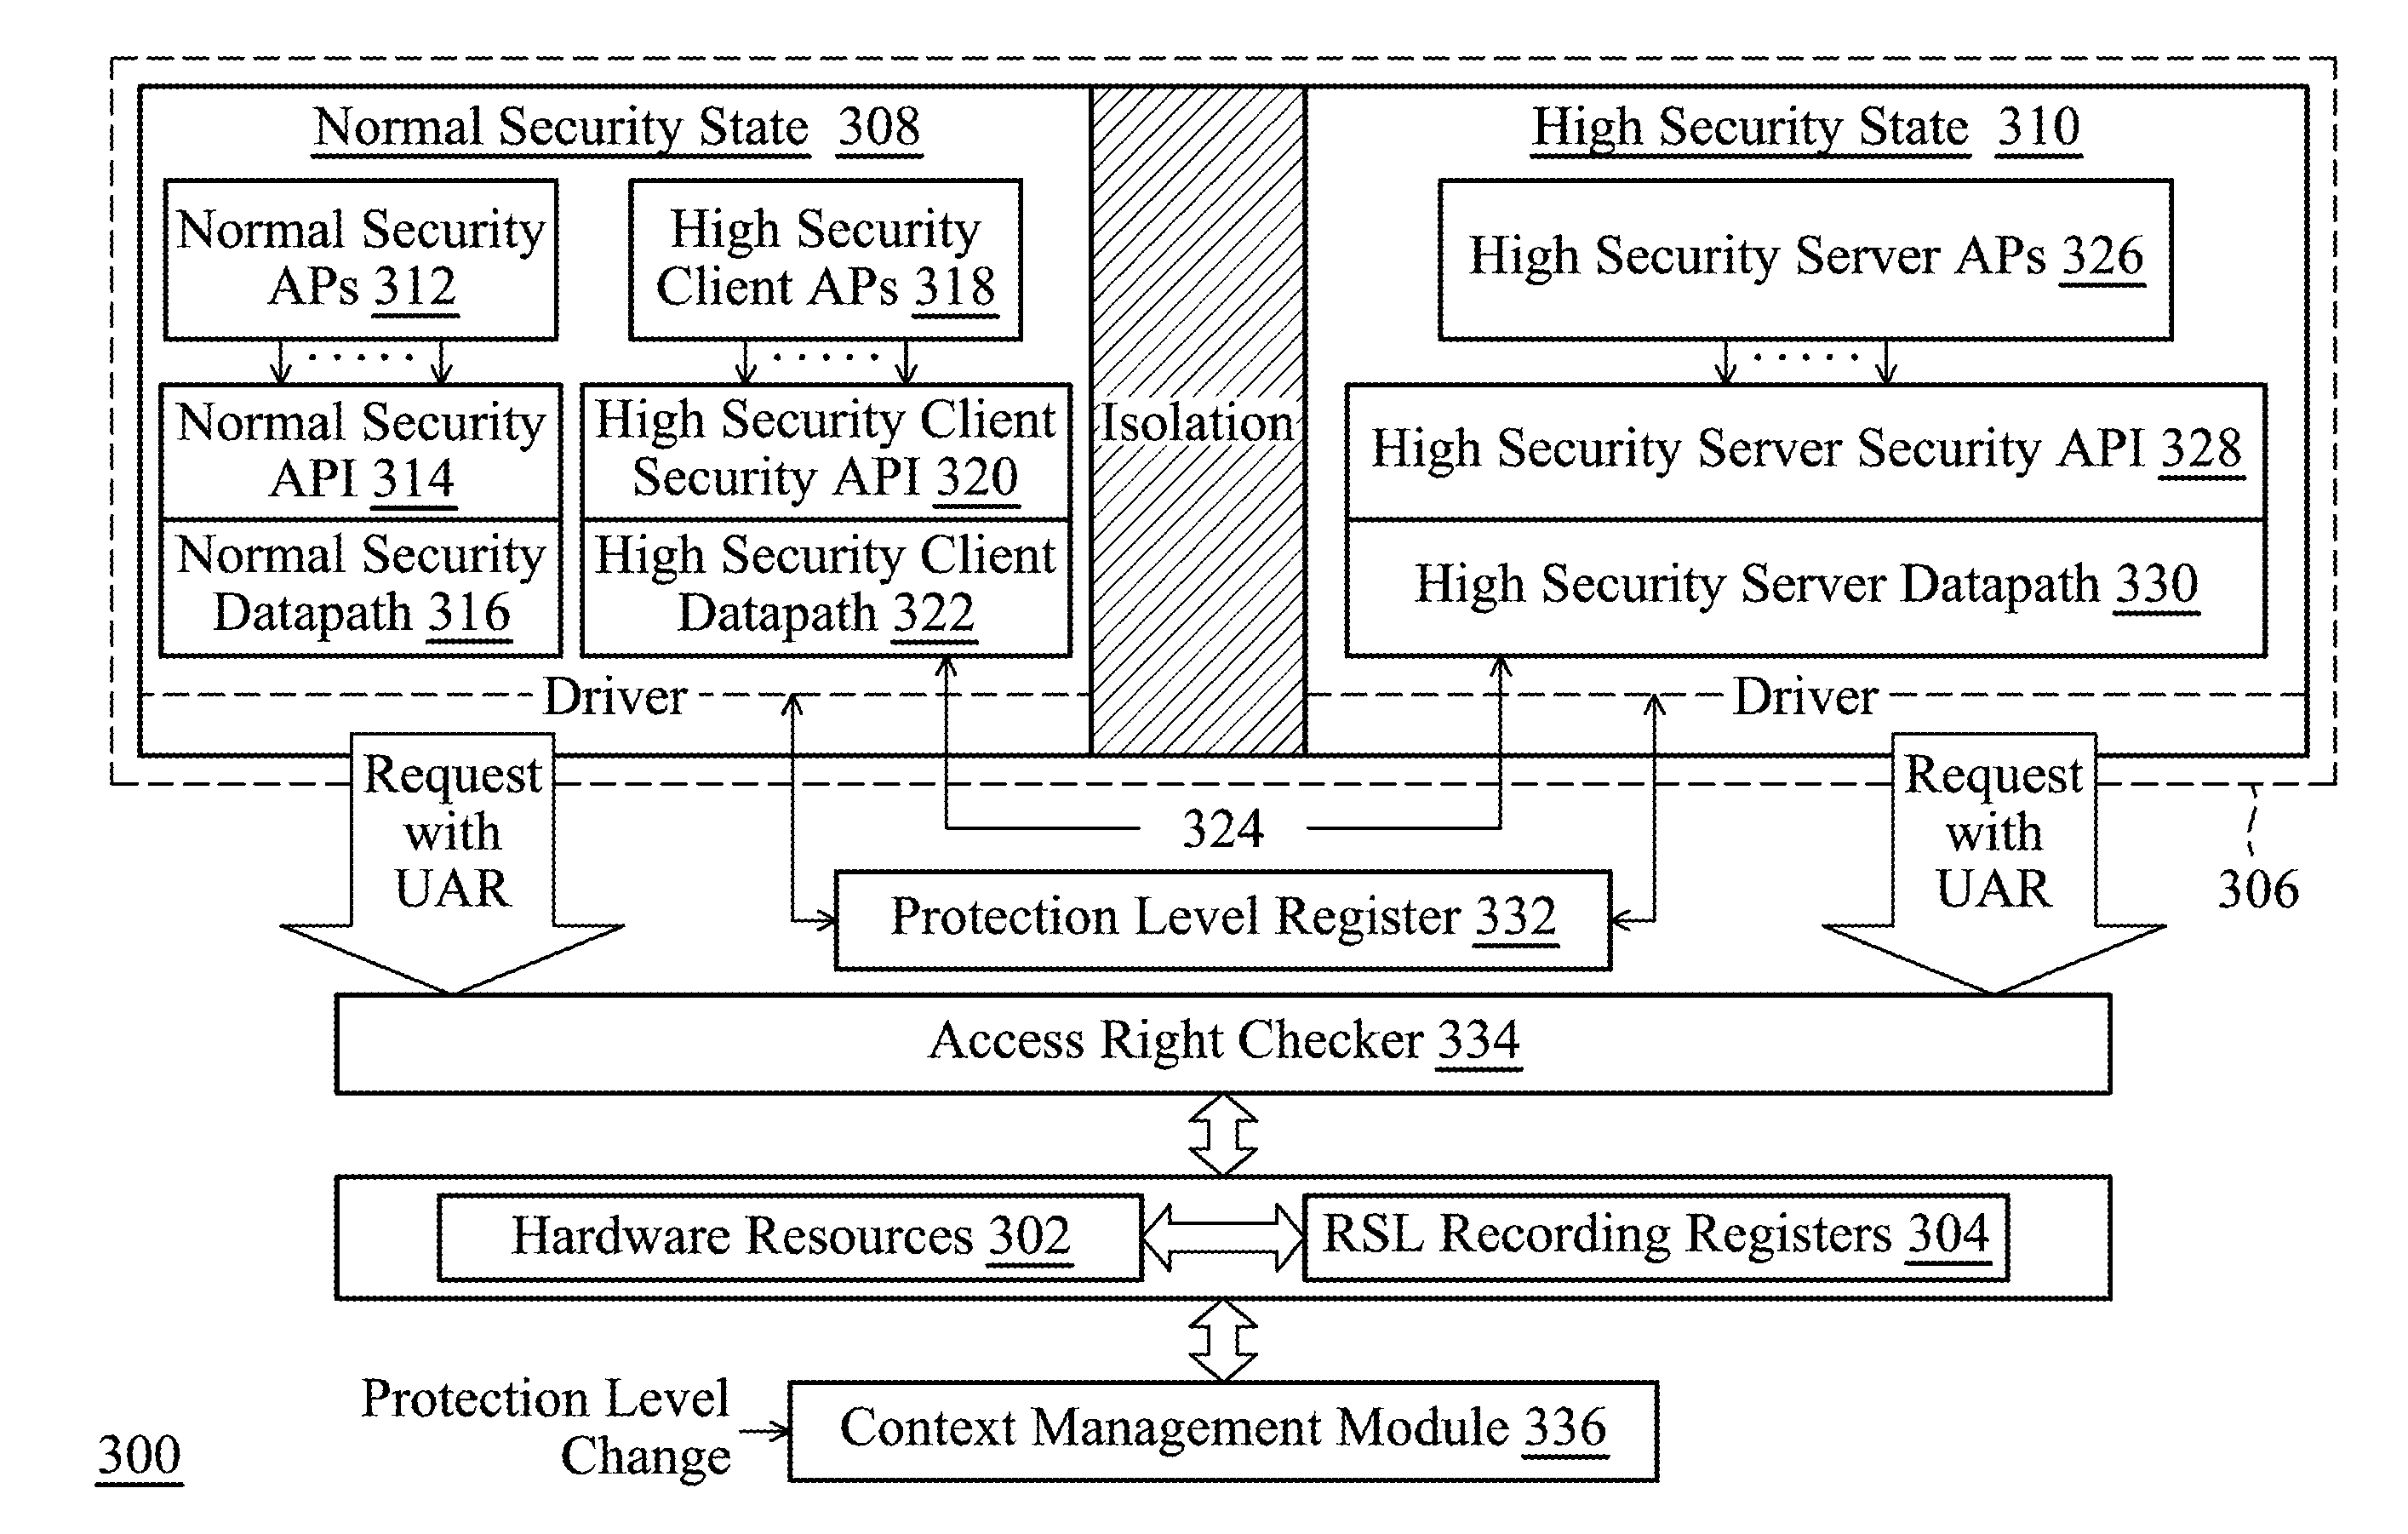 Computing System Providing Normal Security and High Security Services